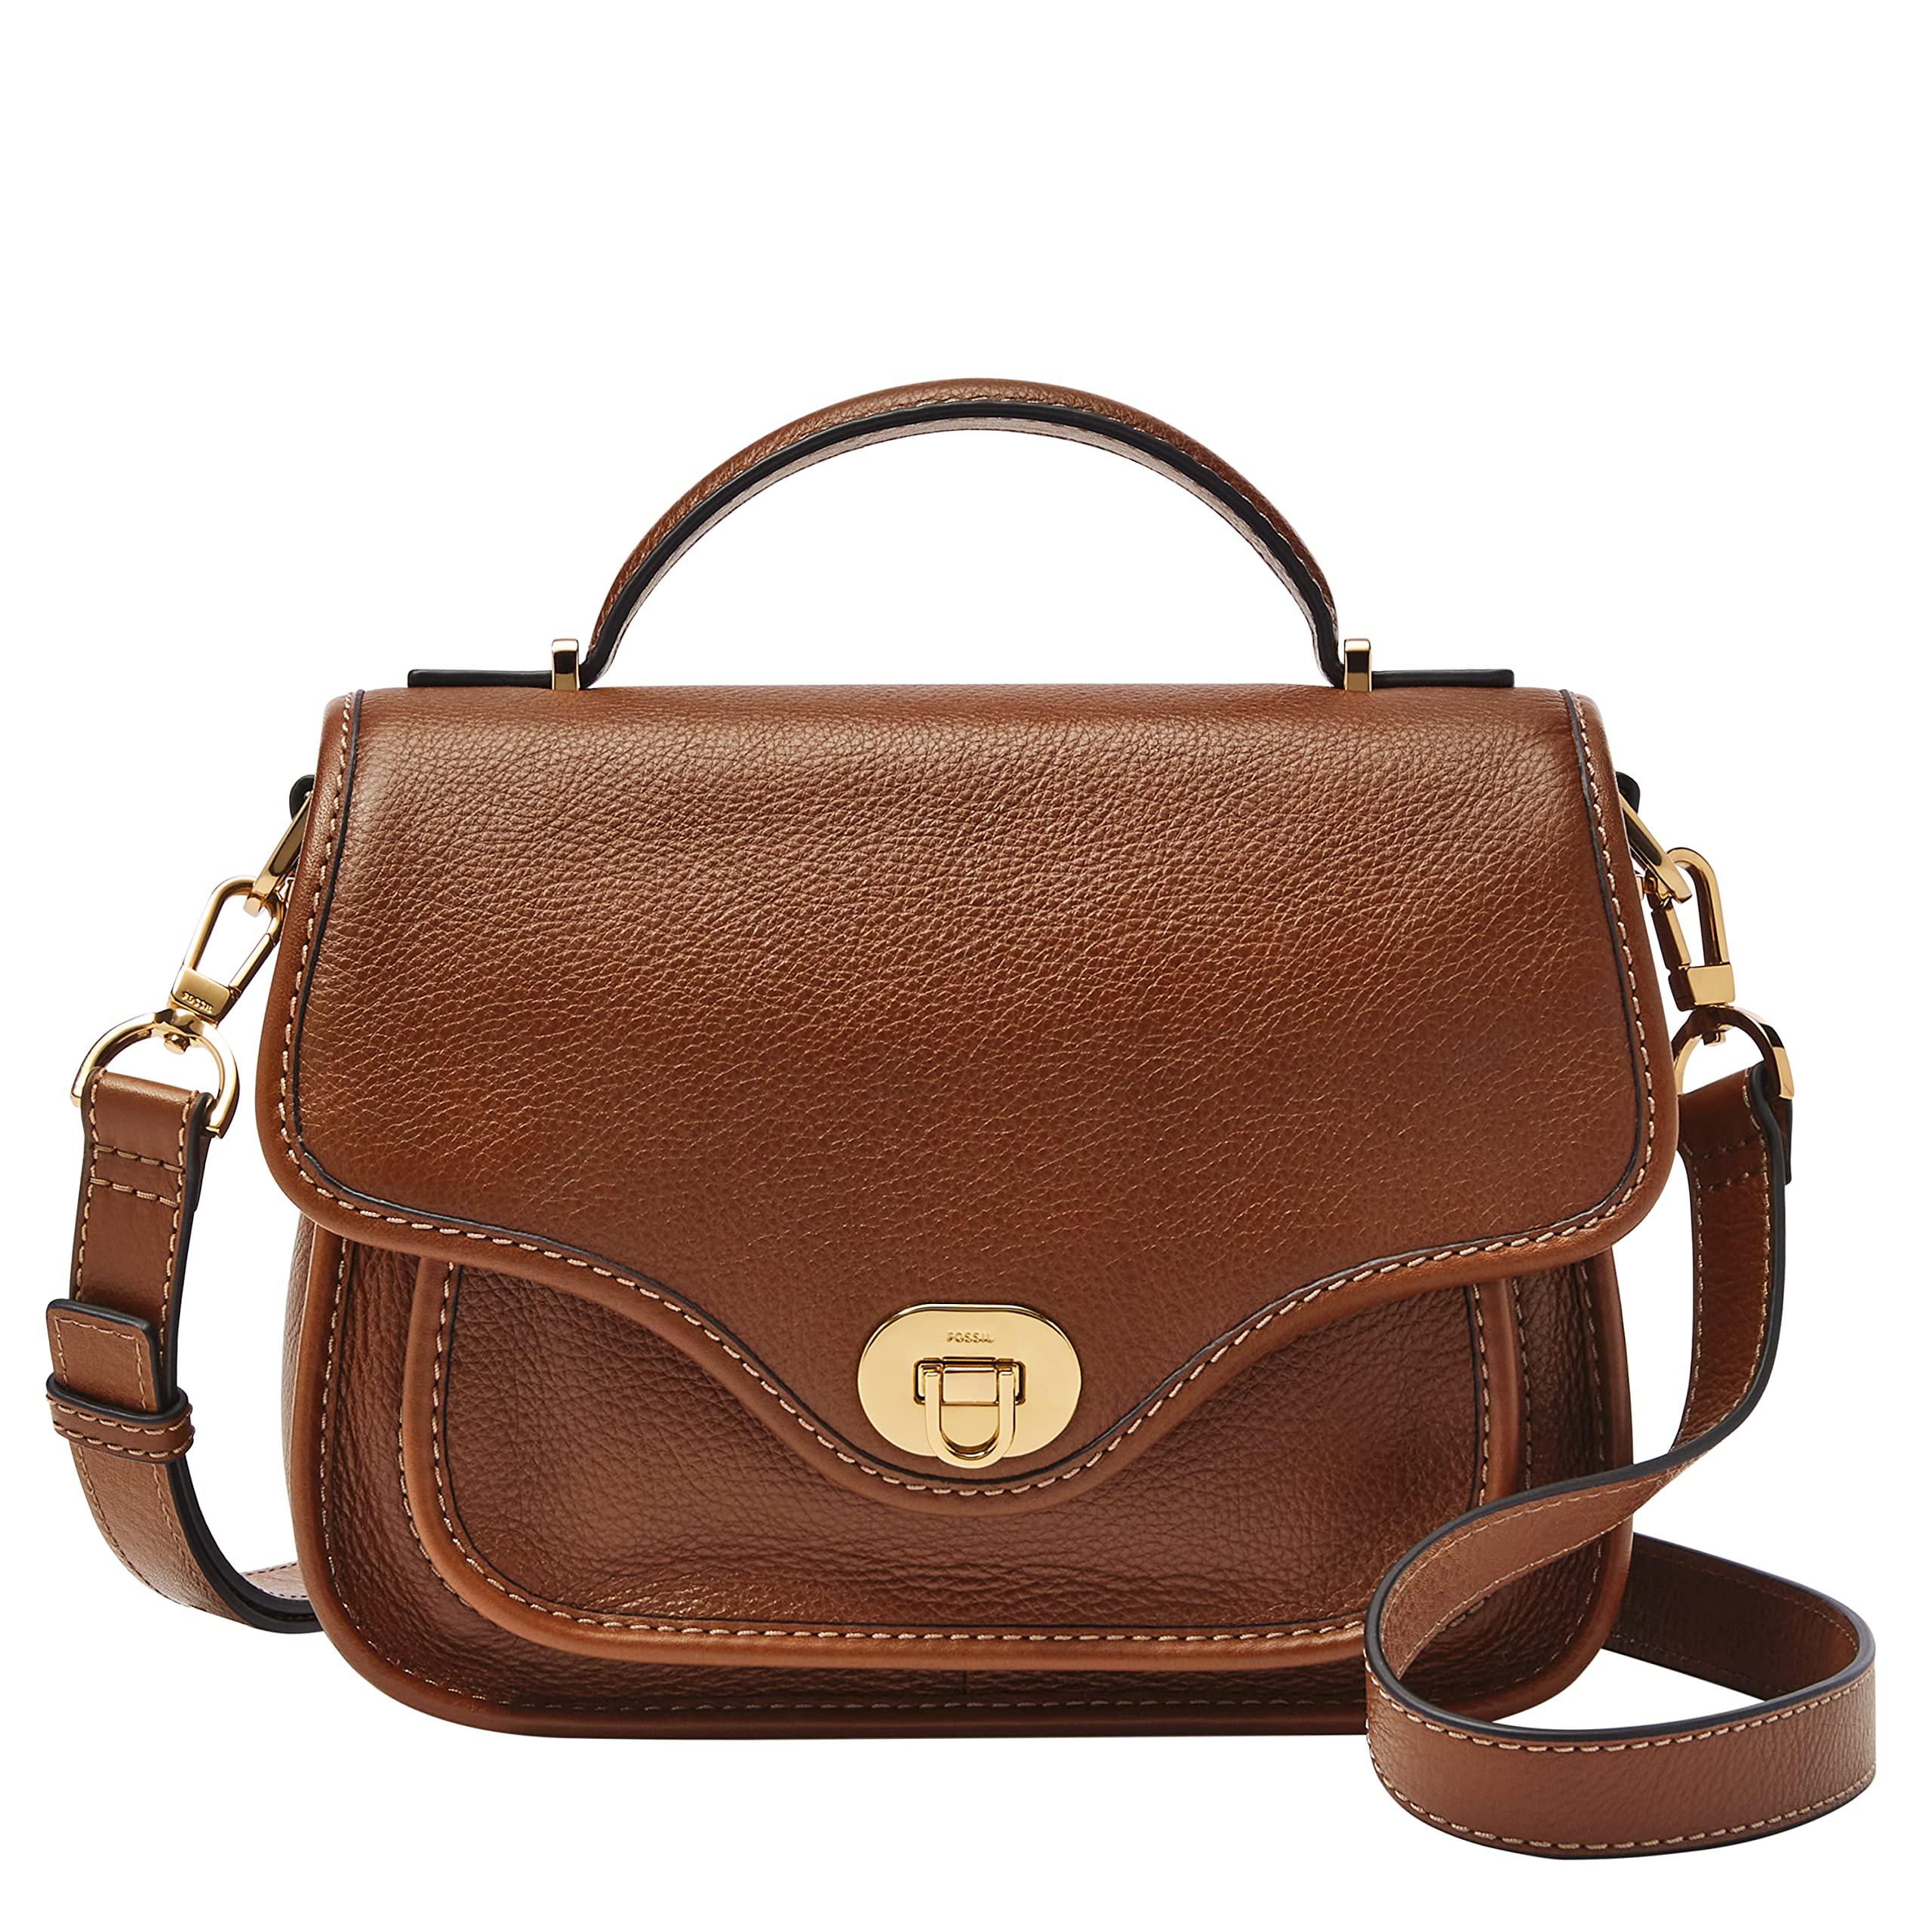 Fossil Heritage Leather Top Handle Crossbody Purse Handbag in Brown | Lyst